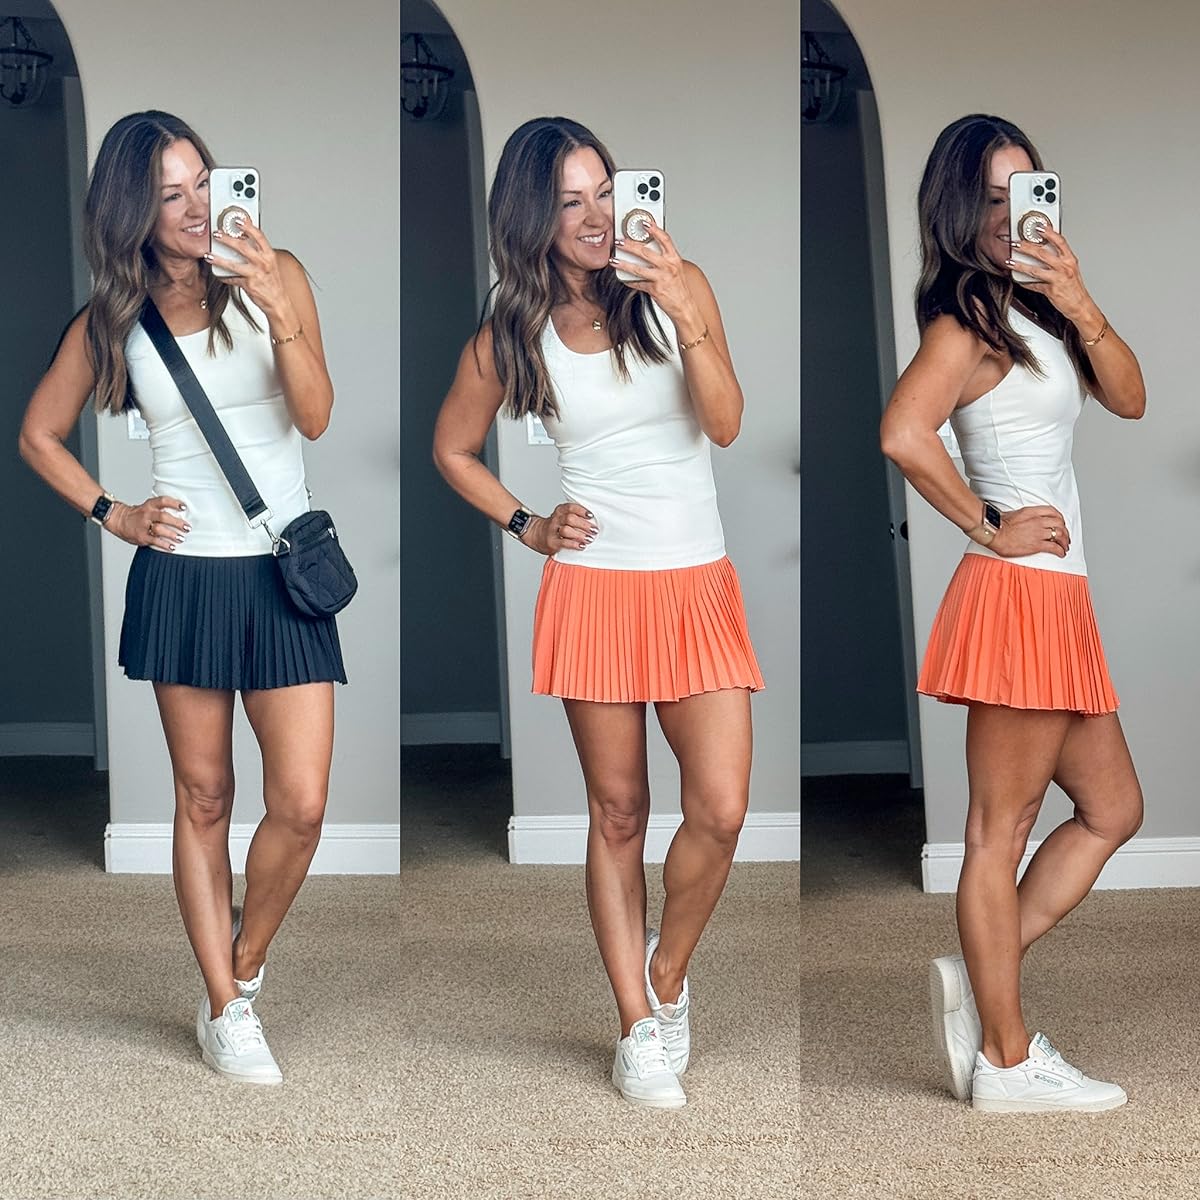 new and trending activewear + athleisure styles amazon | activewear, athleisure, workout clothes, gym outfit, gym clothes, amazon fashion, pleated skirt, mini skirt, tank top, pickleball outfit 